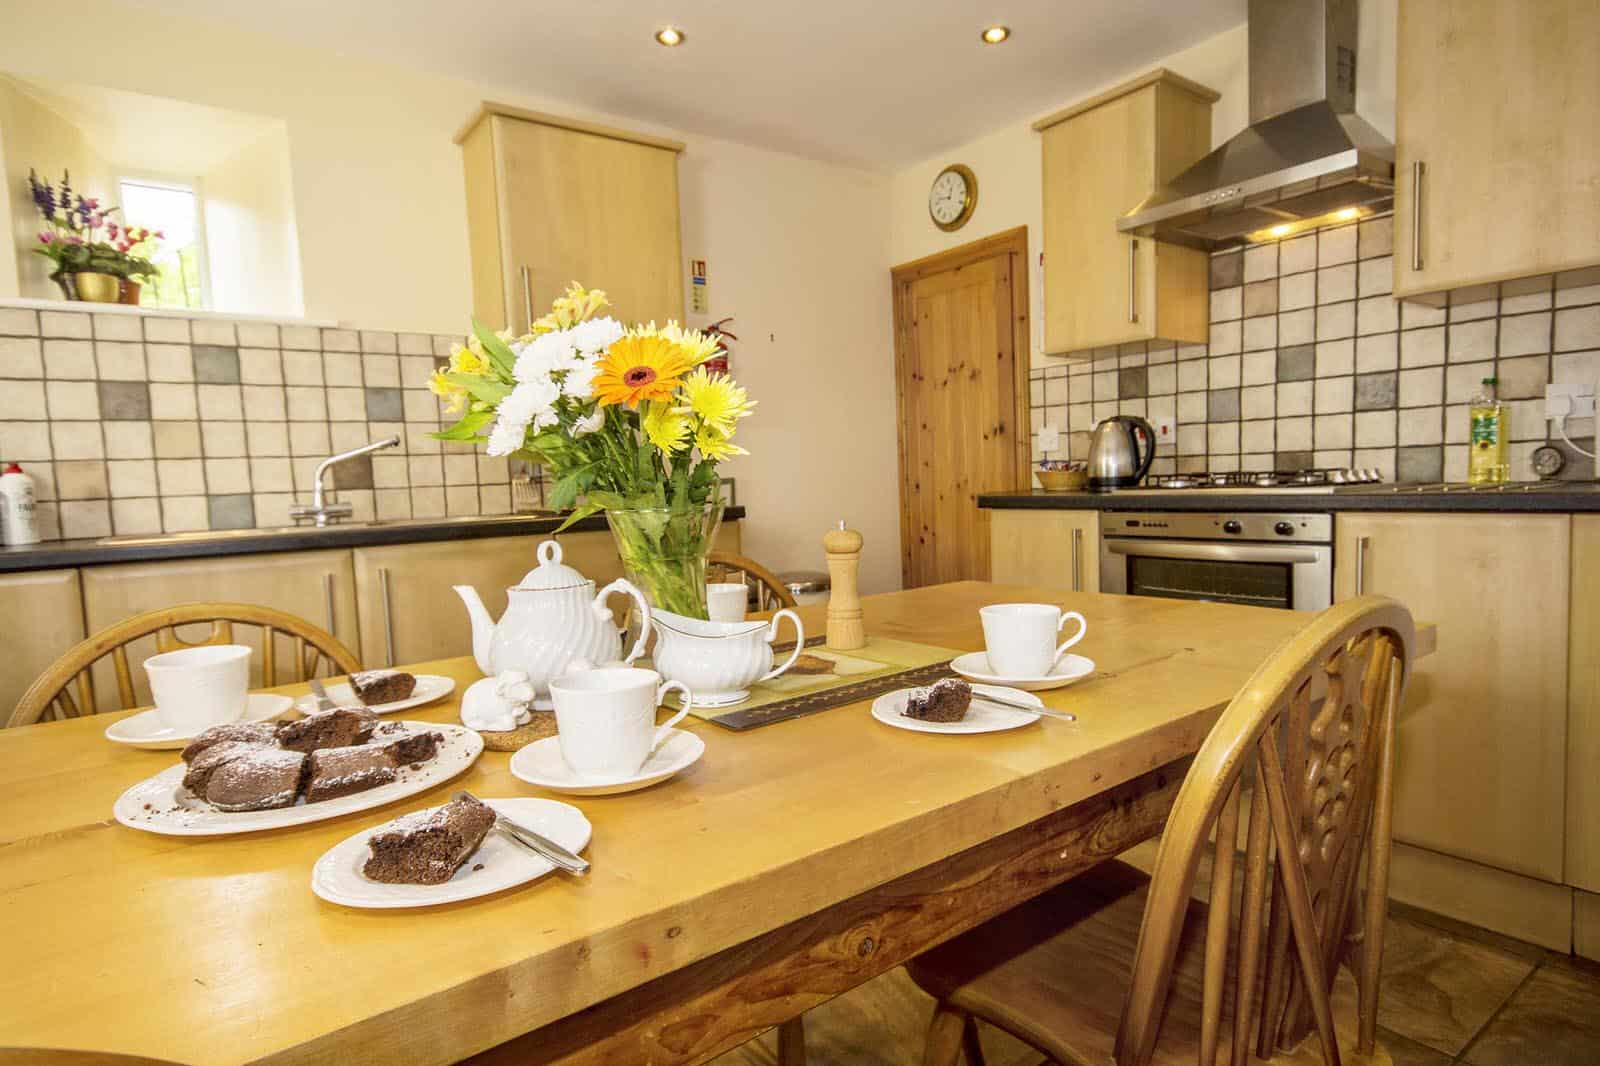 Holiday cottage kitchen with everything you need